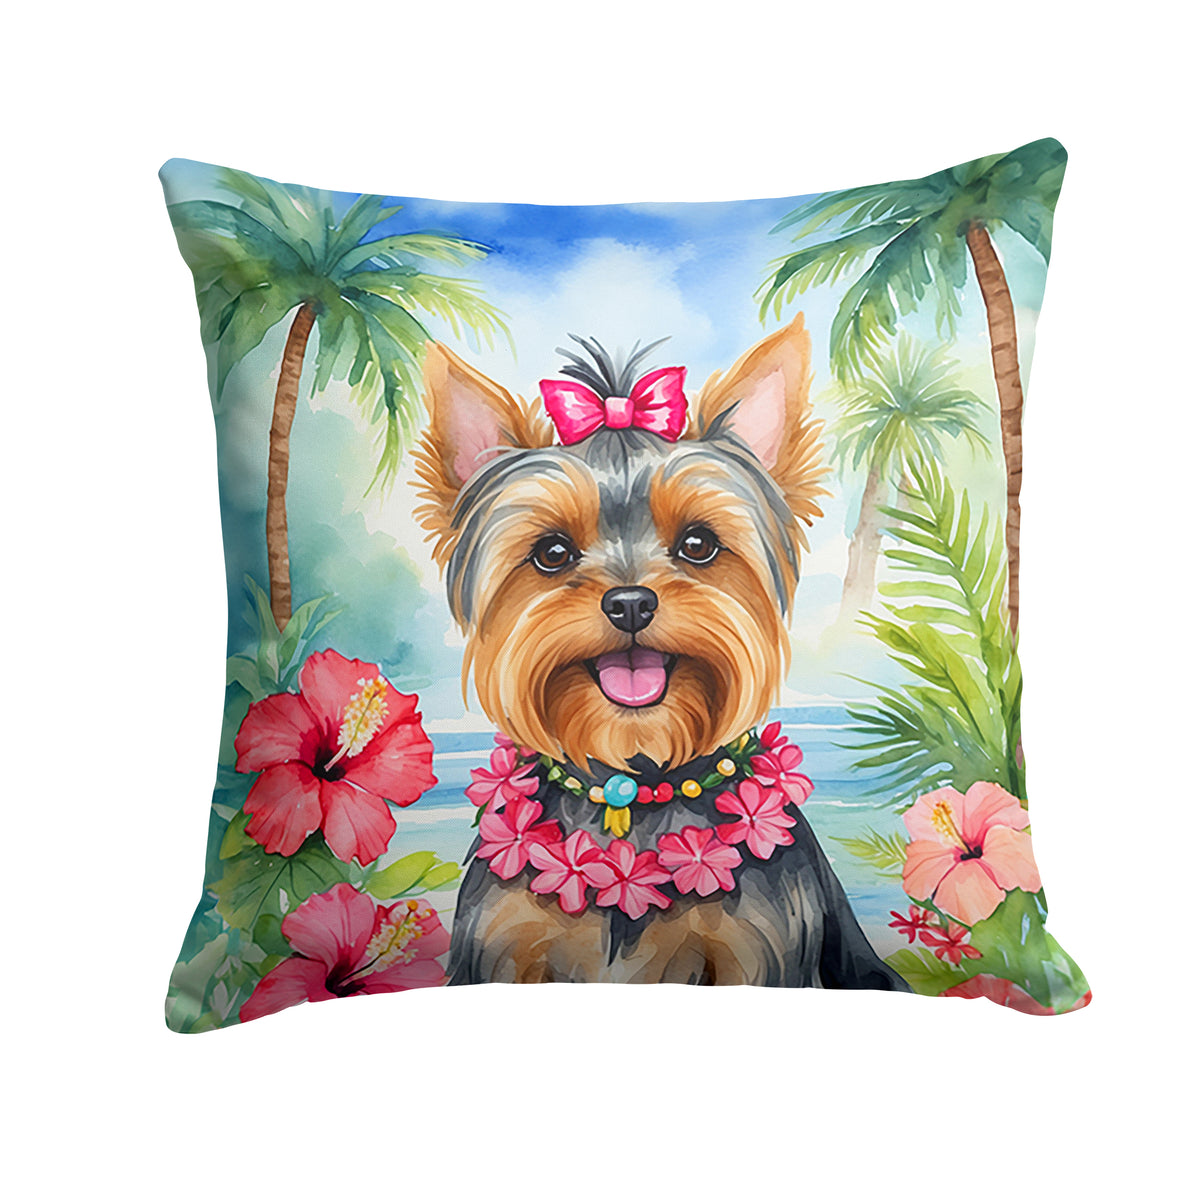 Buy this Yorkshire Terrier Luau Throw Pillow